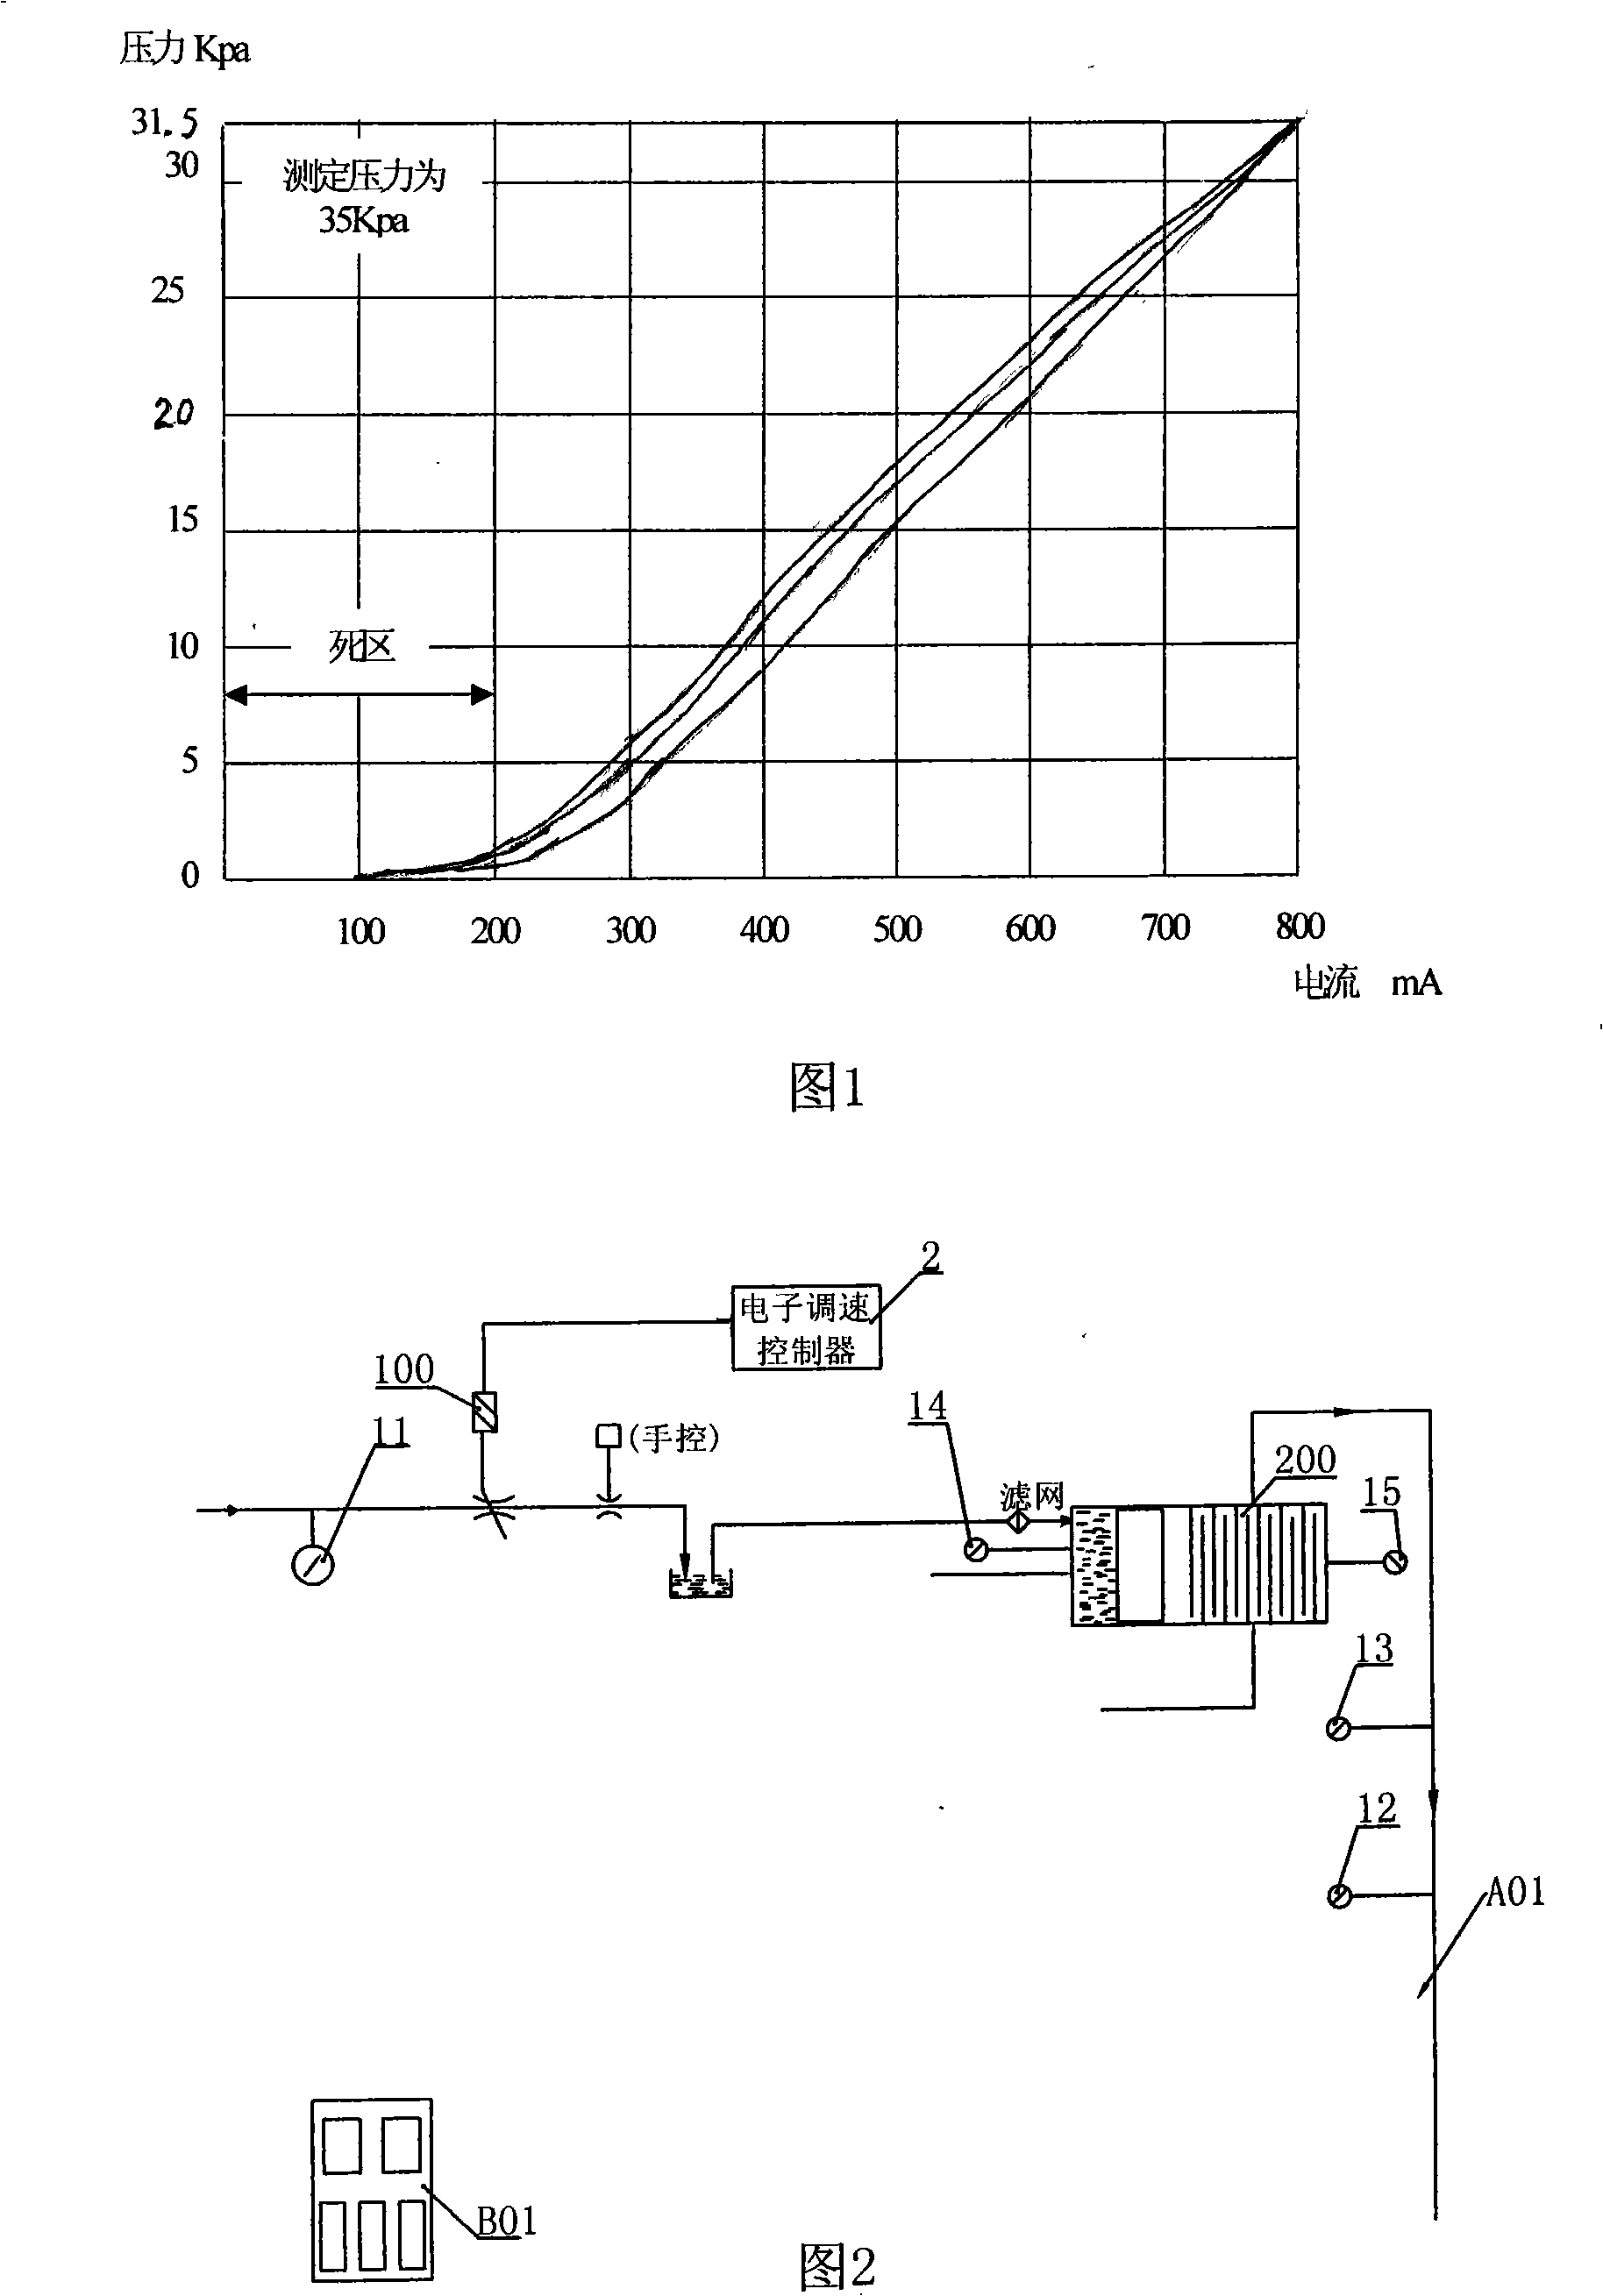 Applications-oriented control device of speed-regulating clutch and control method thereof